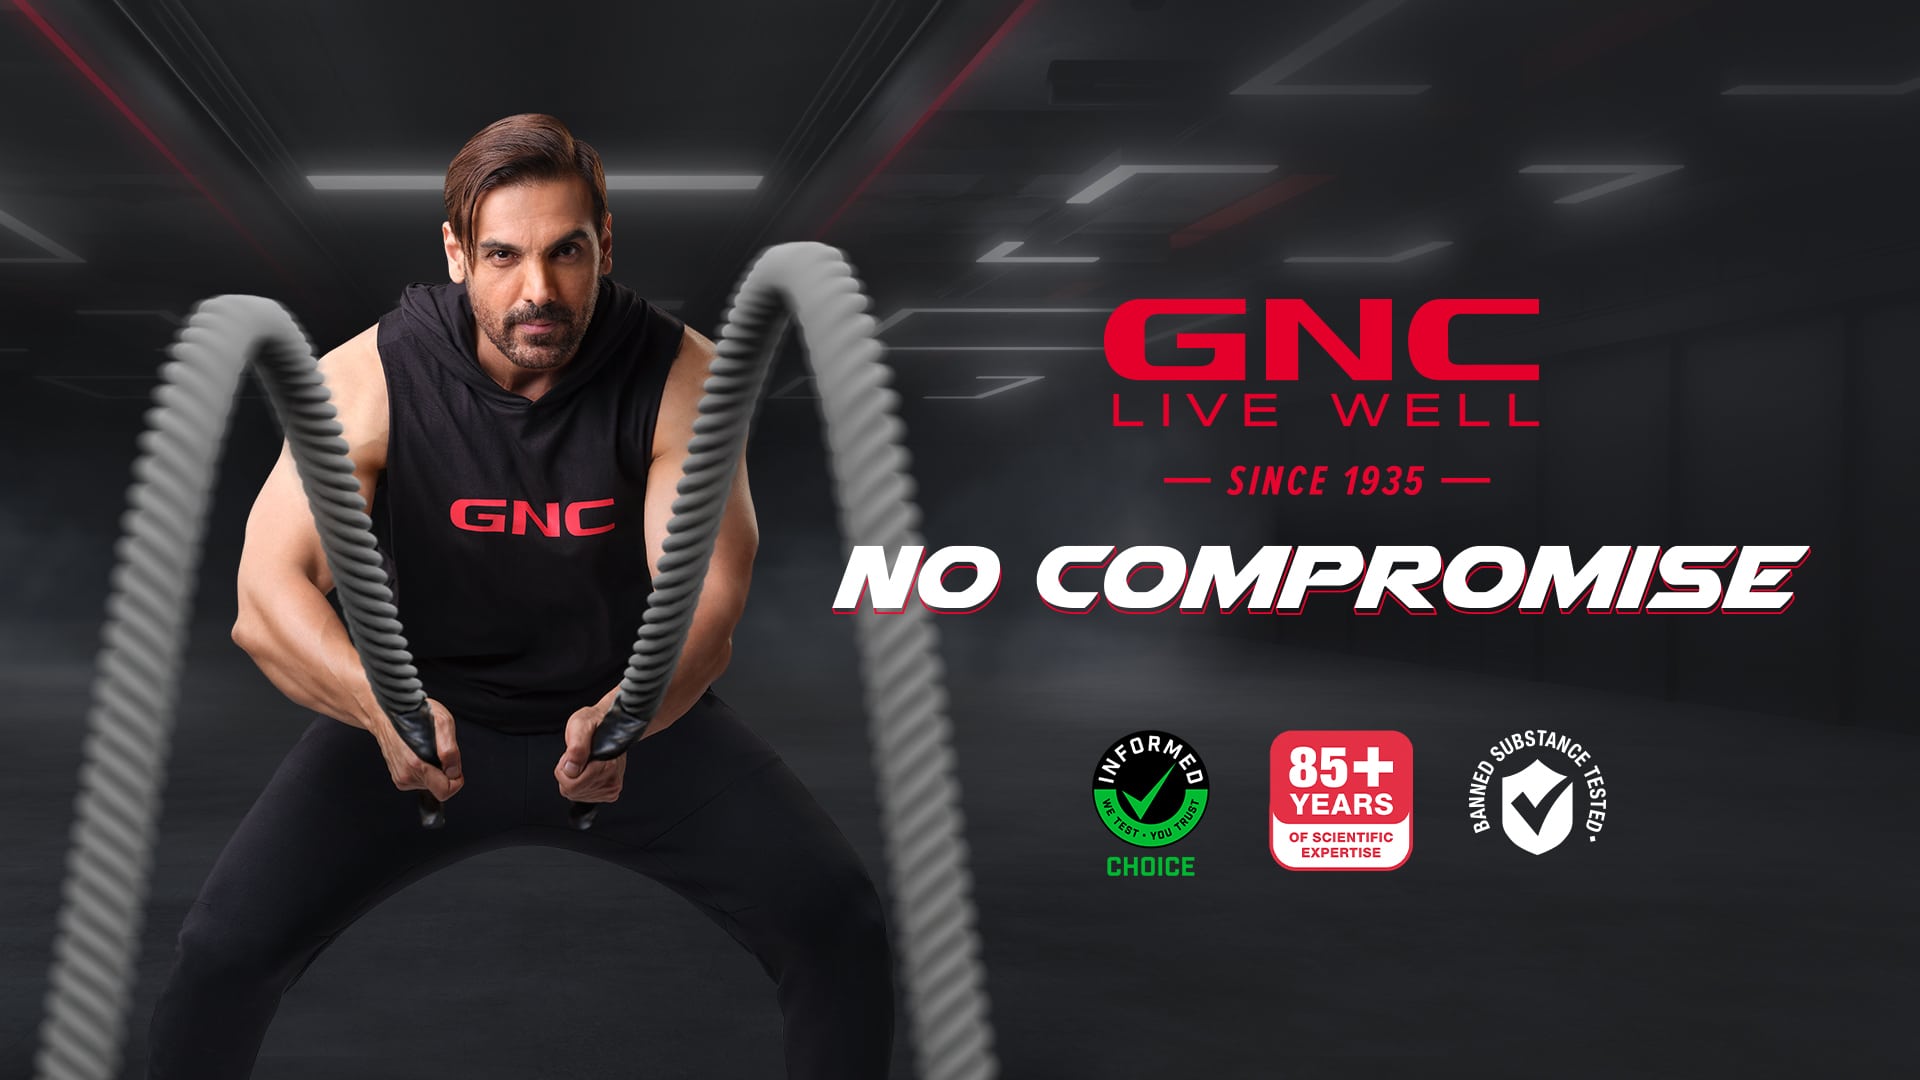 GNC India launches new campaign with John Abraham